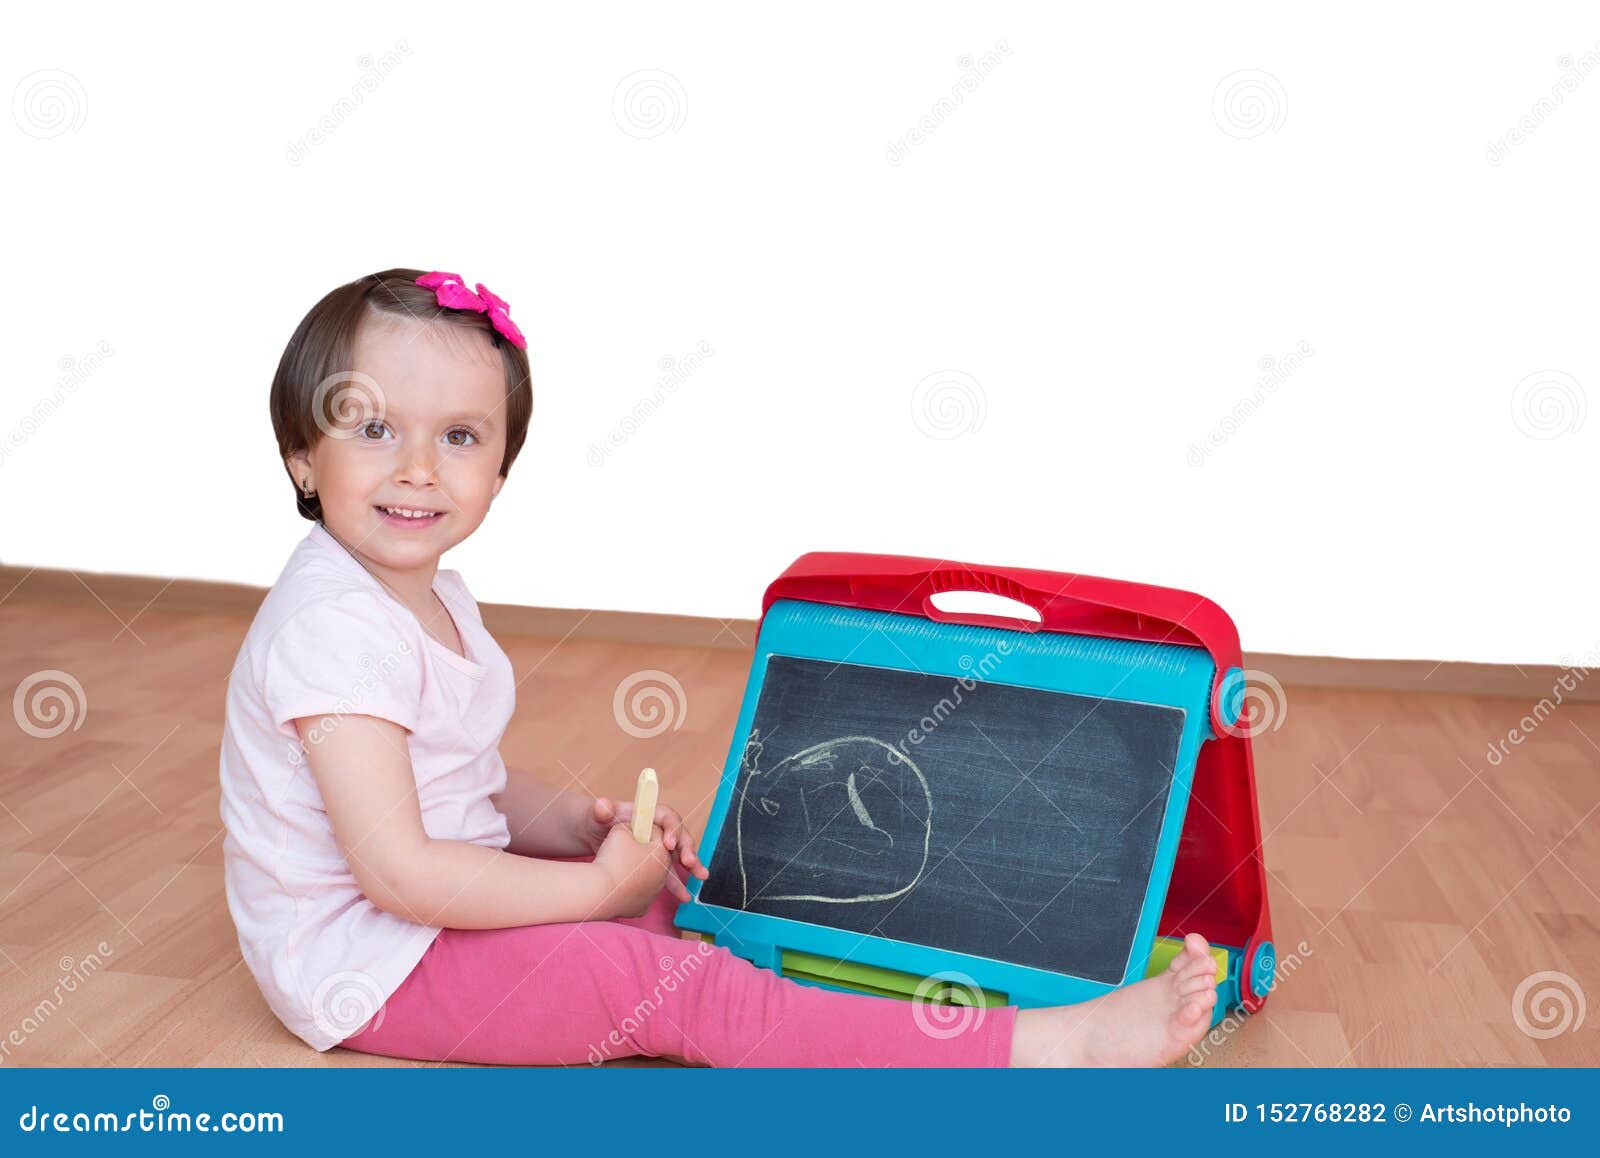 Happy Little Toddler Girl With Chalk Desk In Hands 